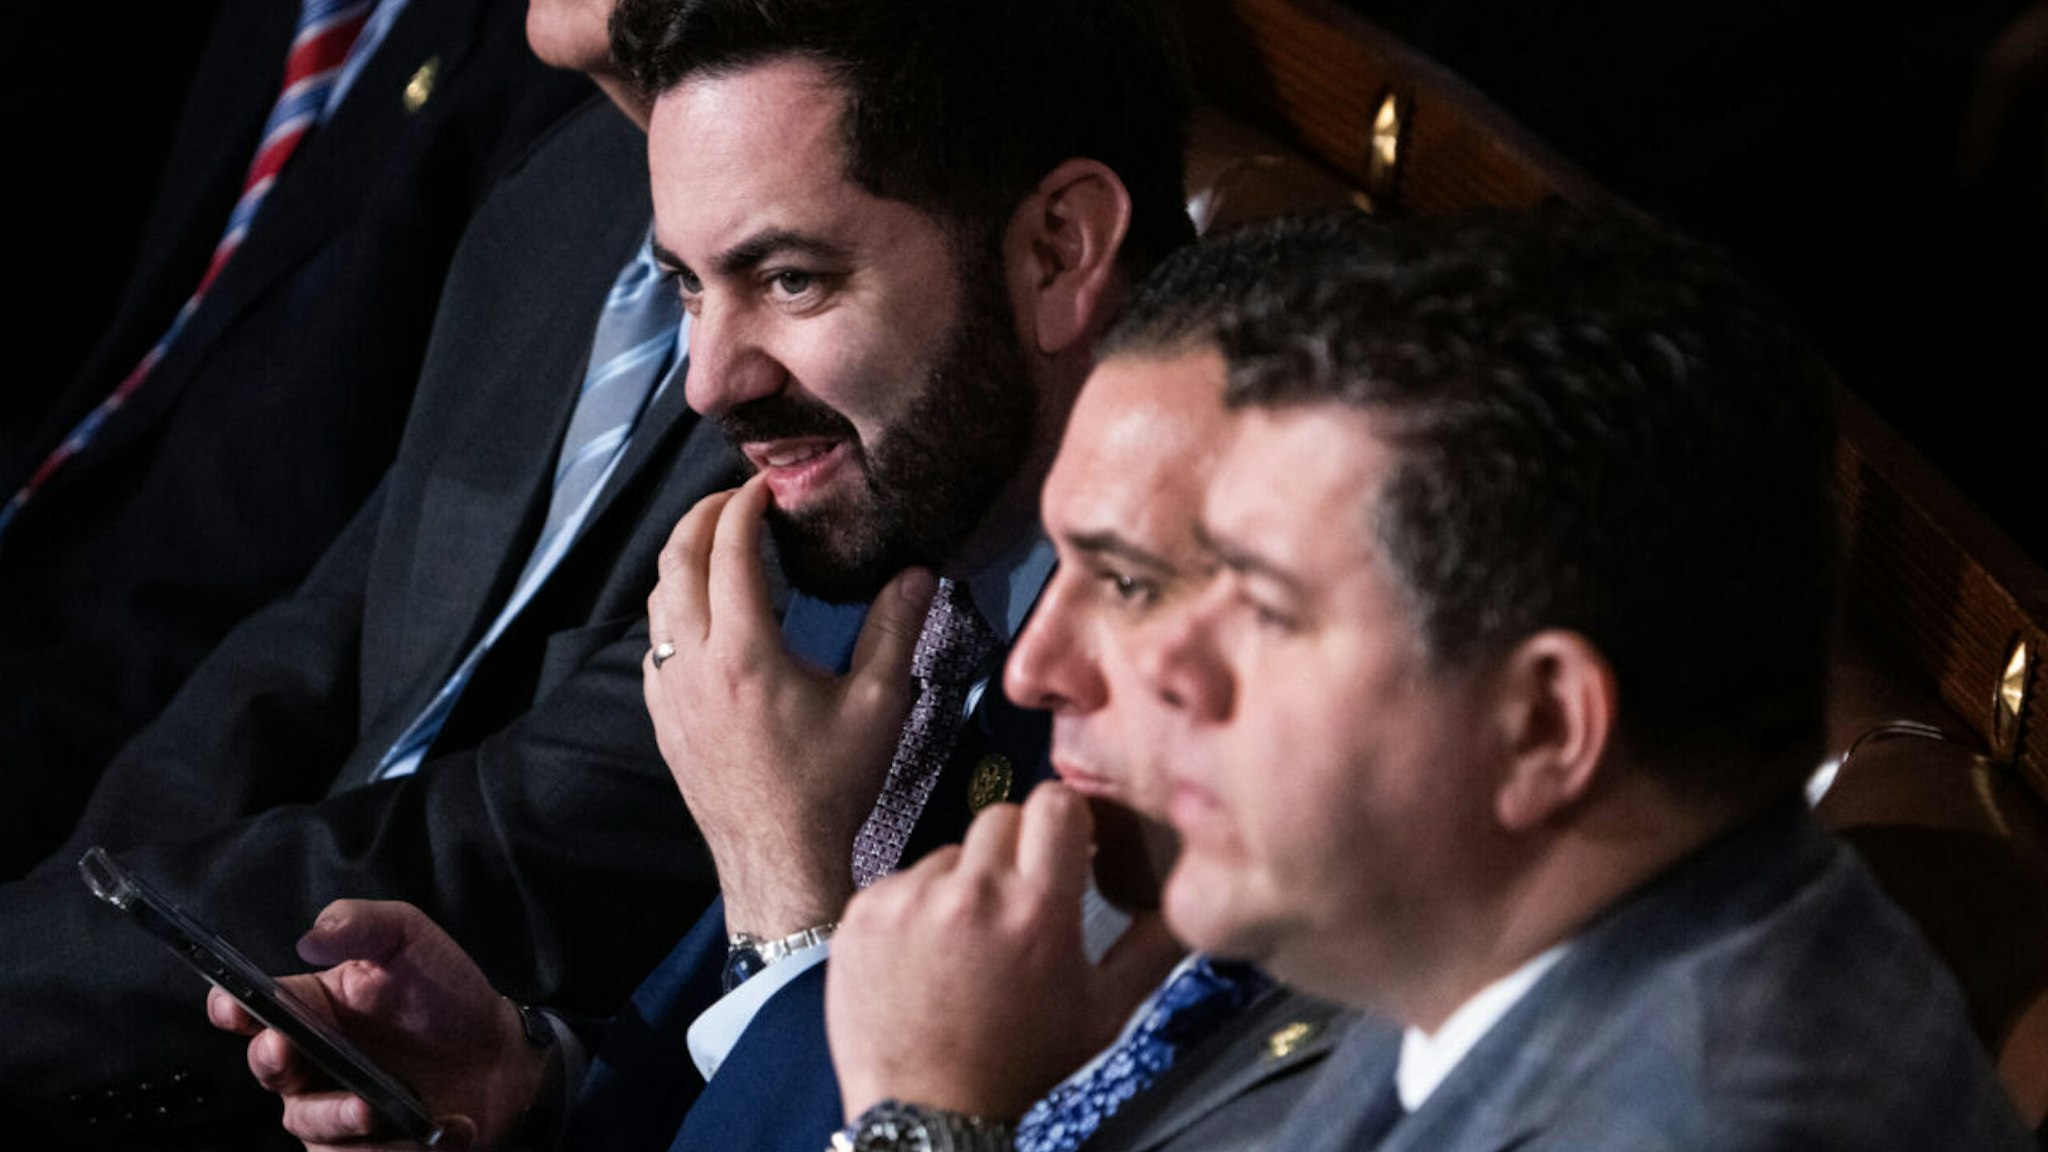 From left, Reps. Mike Lawler, R-N.Y., Anthony D'Esposito, R-N.Y., and Nick Lalota, R-N.Y., are seen on the House floor of the U.S. Capitol during a second ballot in which Rep. Jim Jordan, R-Ohio, Republican nominee for speaker, failed to receive enough votes to win the position on Wednesday, October 18, 2023.